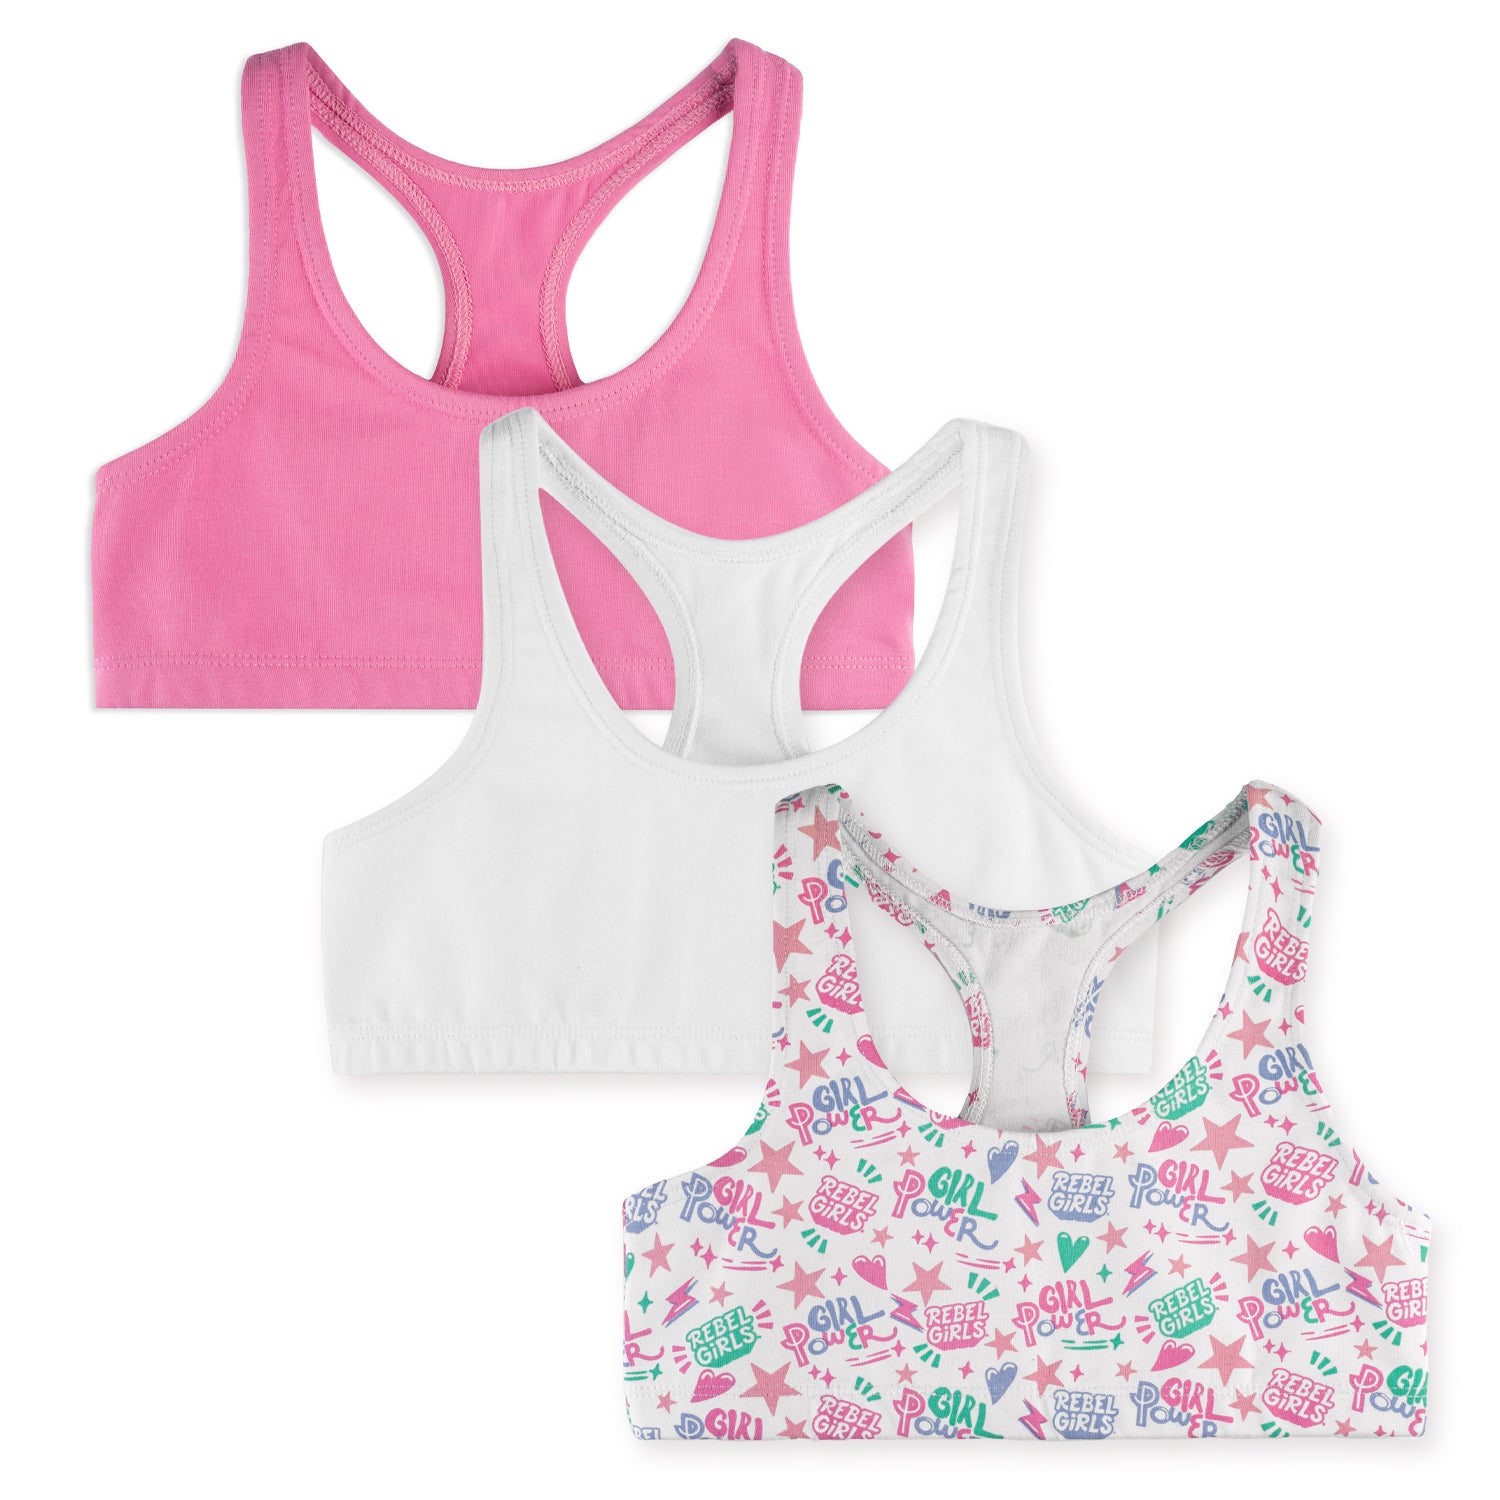 Girls Bras: Organic Cotton Racerback 3 Pack - Mightly